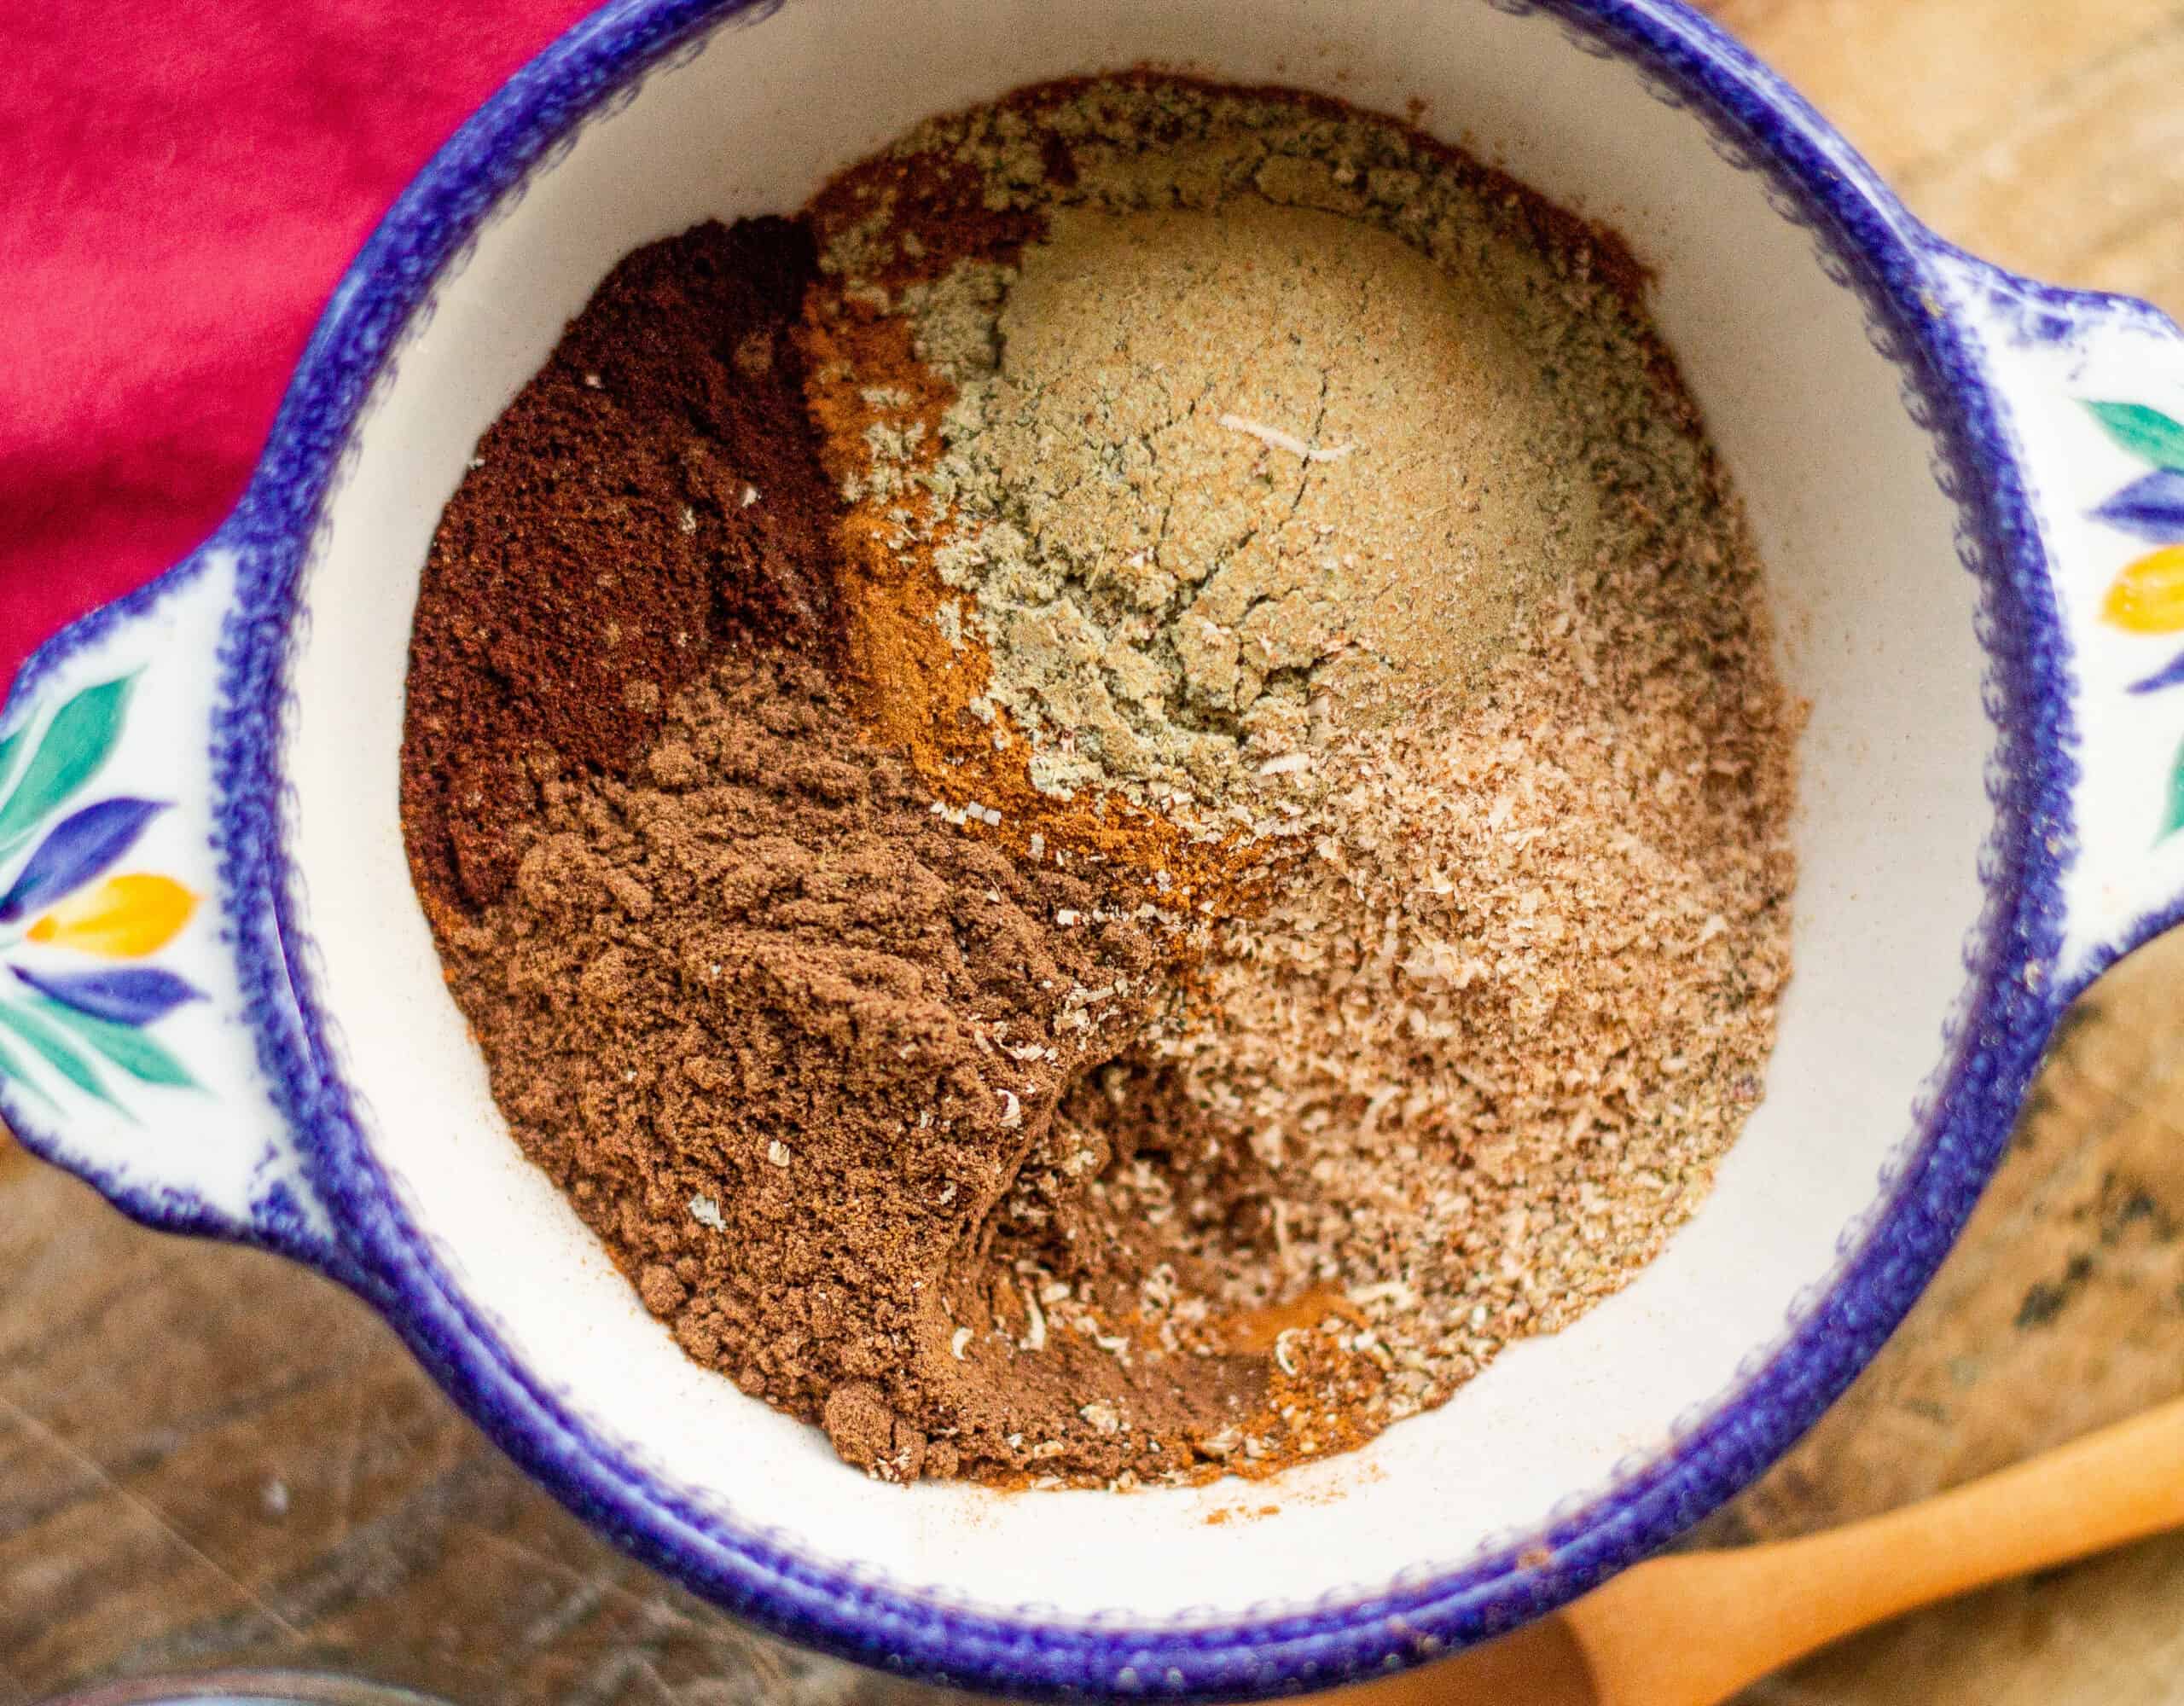 Ingredients for chai powder in a bowl